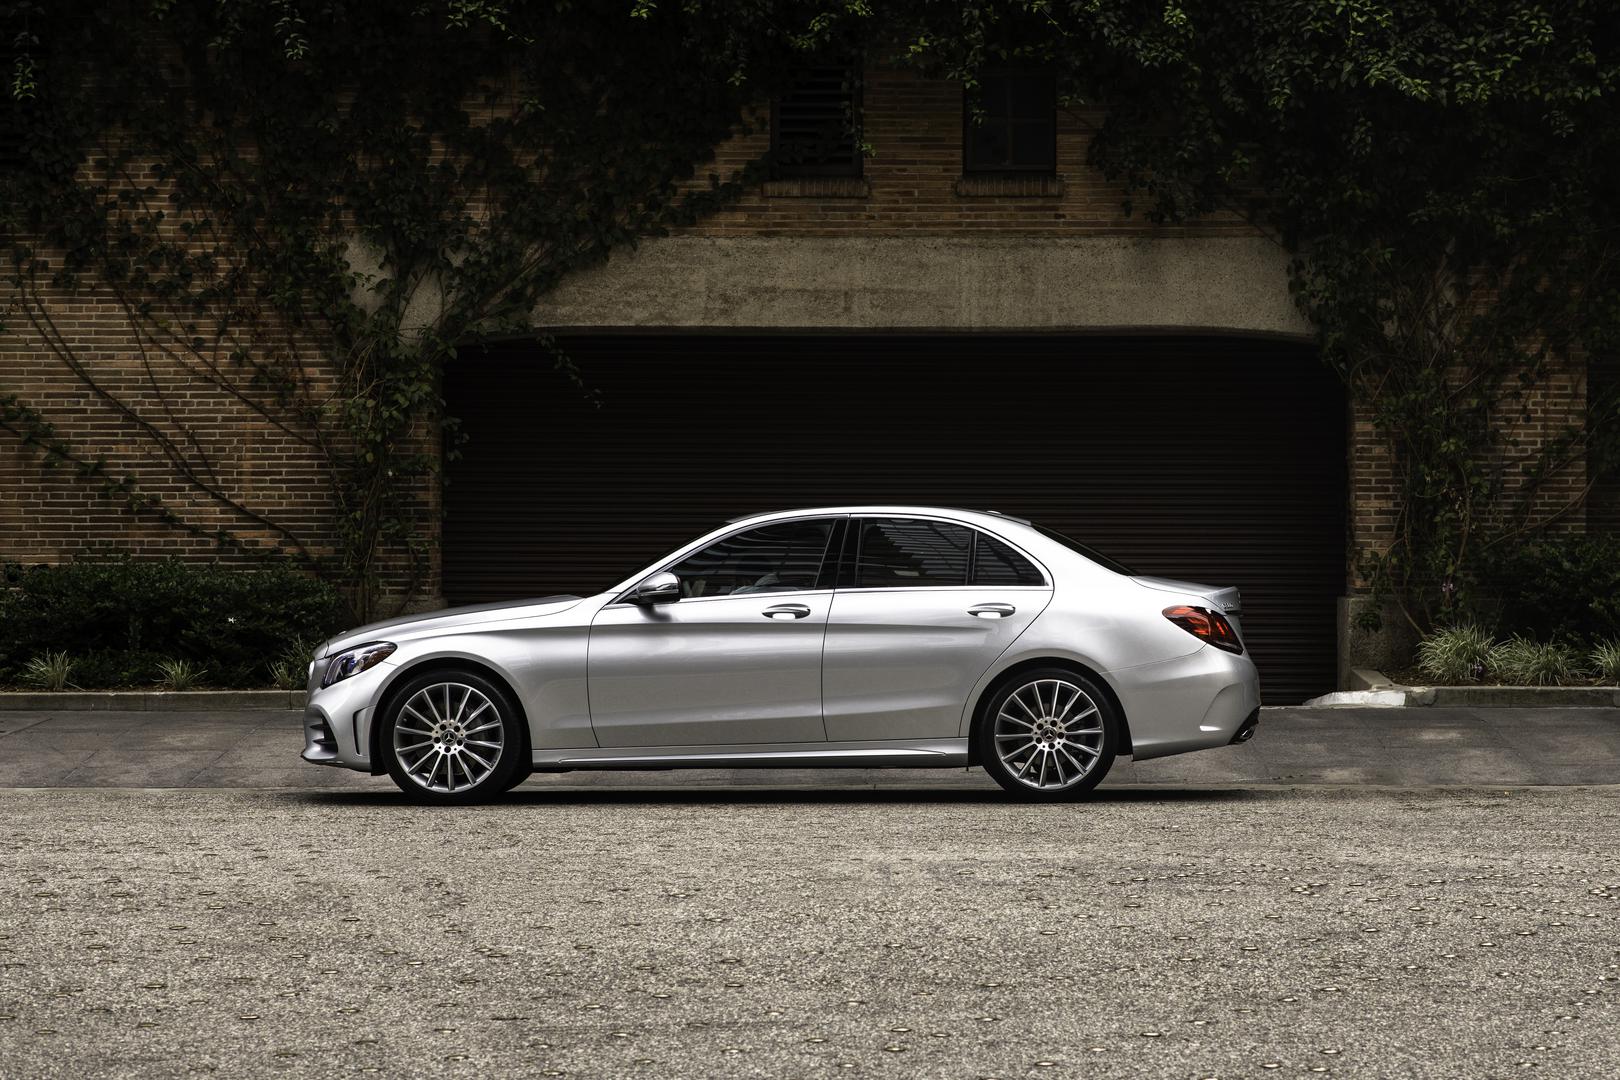 New Mercedes-Benz available in San Rafael, CA at Mercedes-Benz of Marin